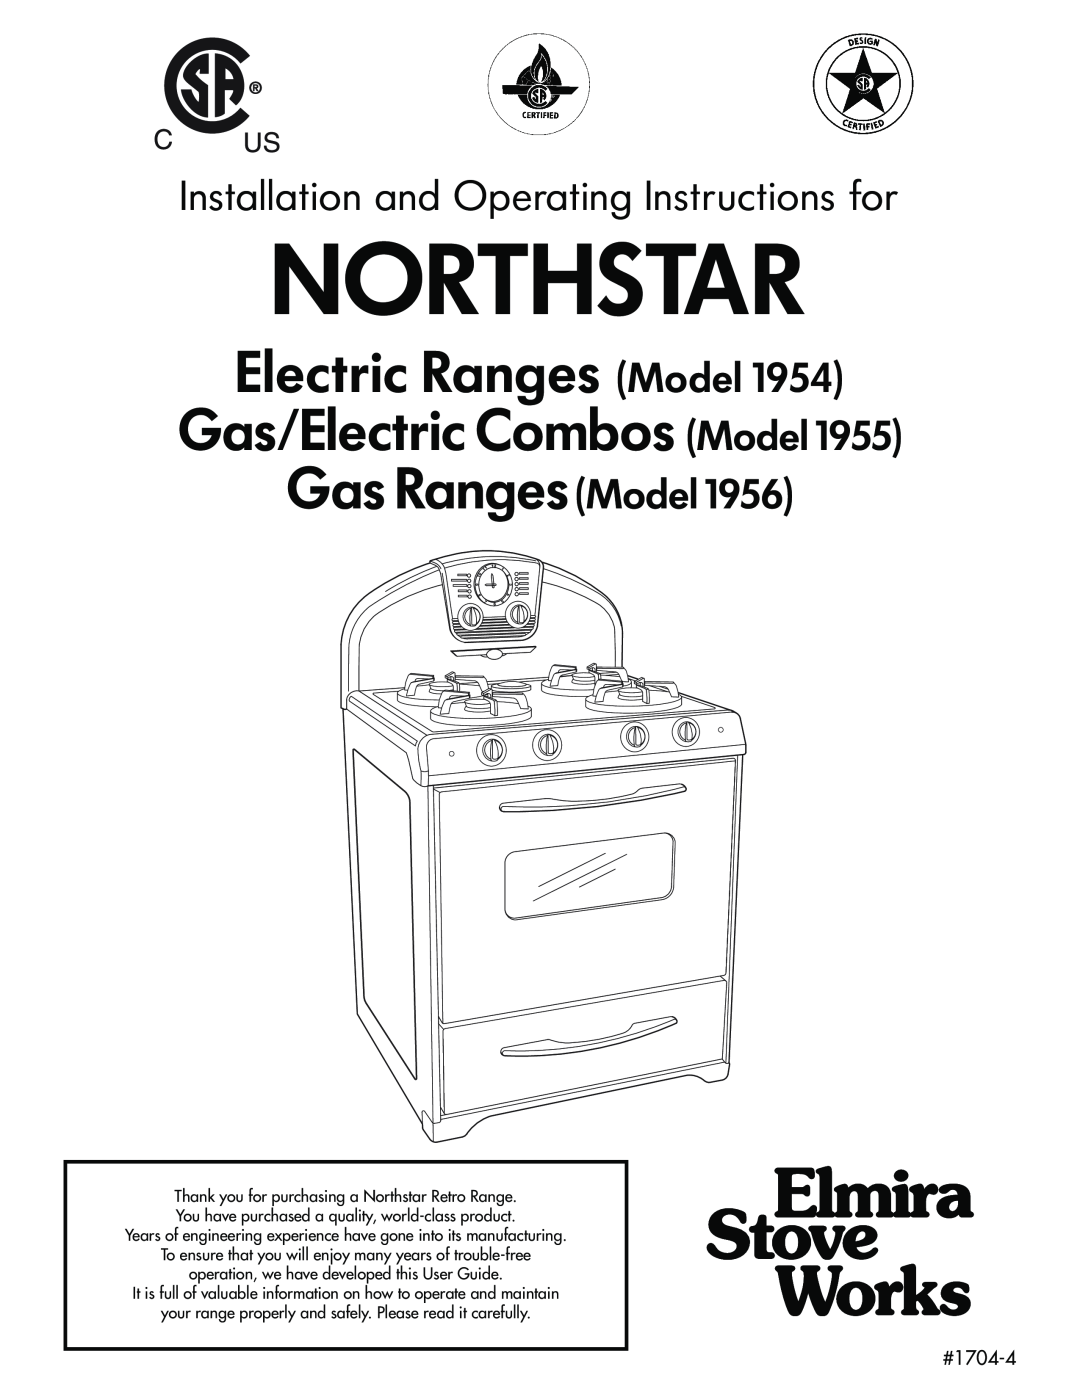 Elmira Stove Works 1954 manual #1704-4, Northstar, Electric Ranges Model, Gas/Electric Combos Model, Gas Ranges Model 